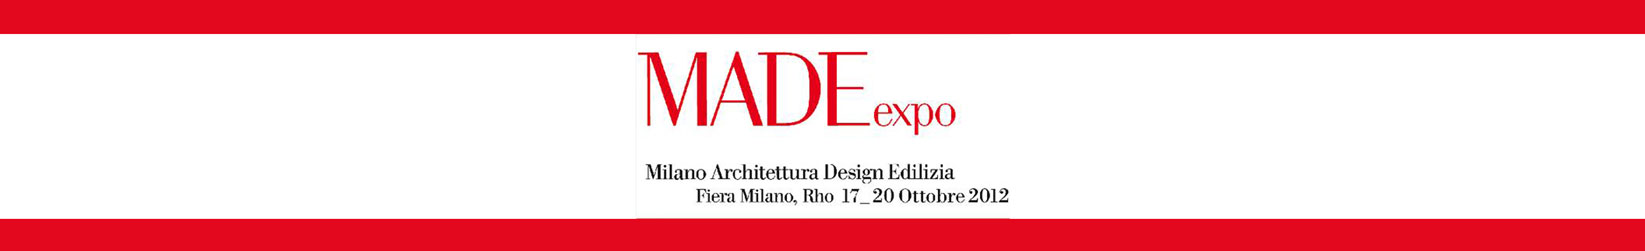 Made Expo 2013